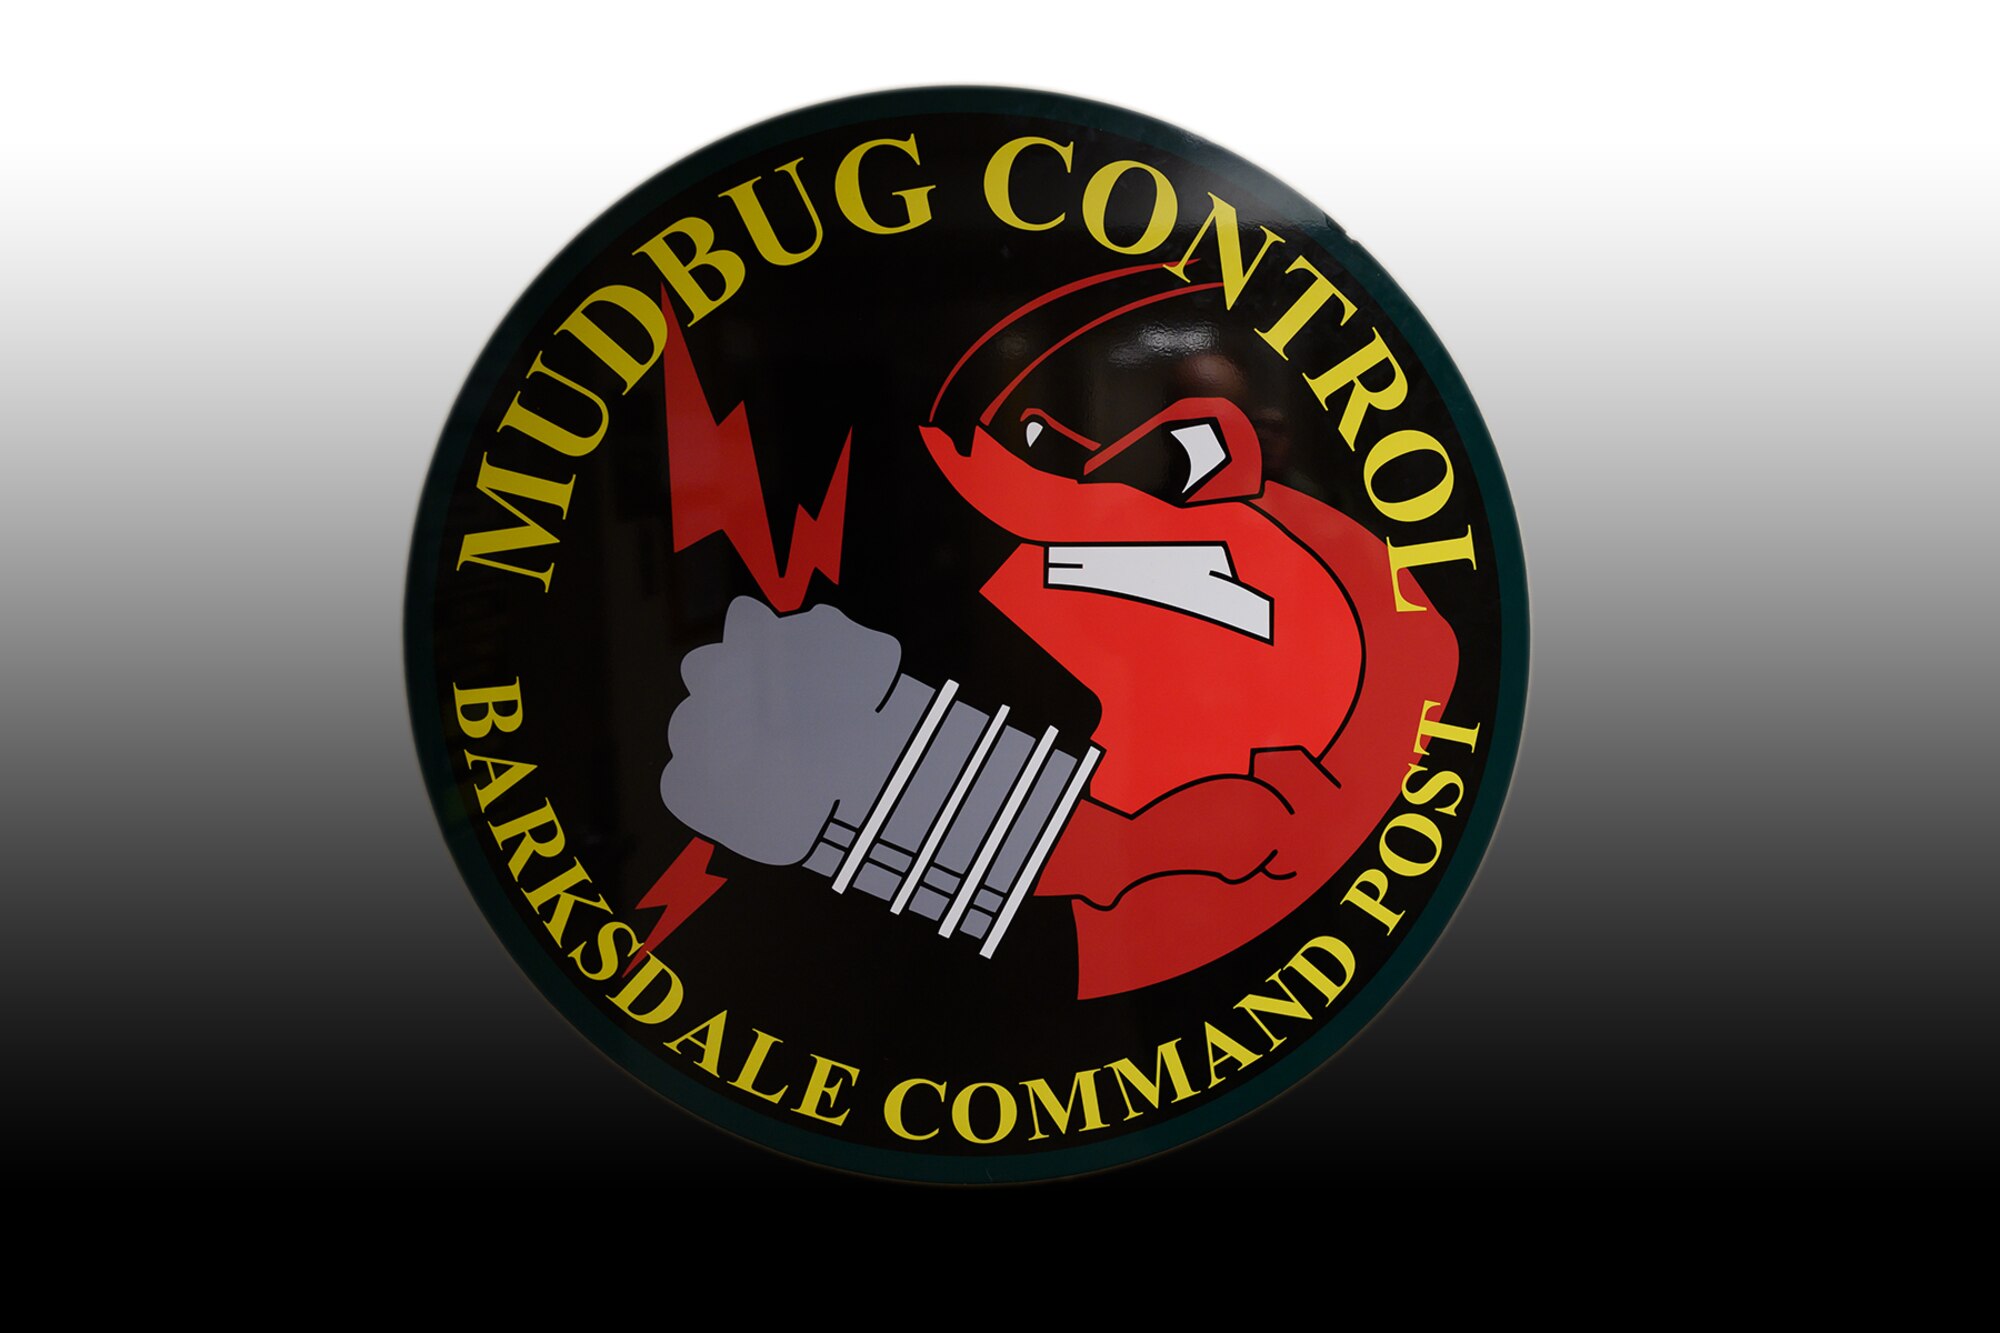 Barksdale Command Post logo showing a crawfish holding lightning in a gloved fist.